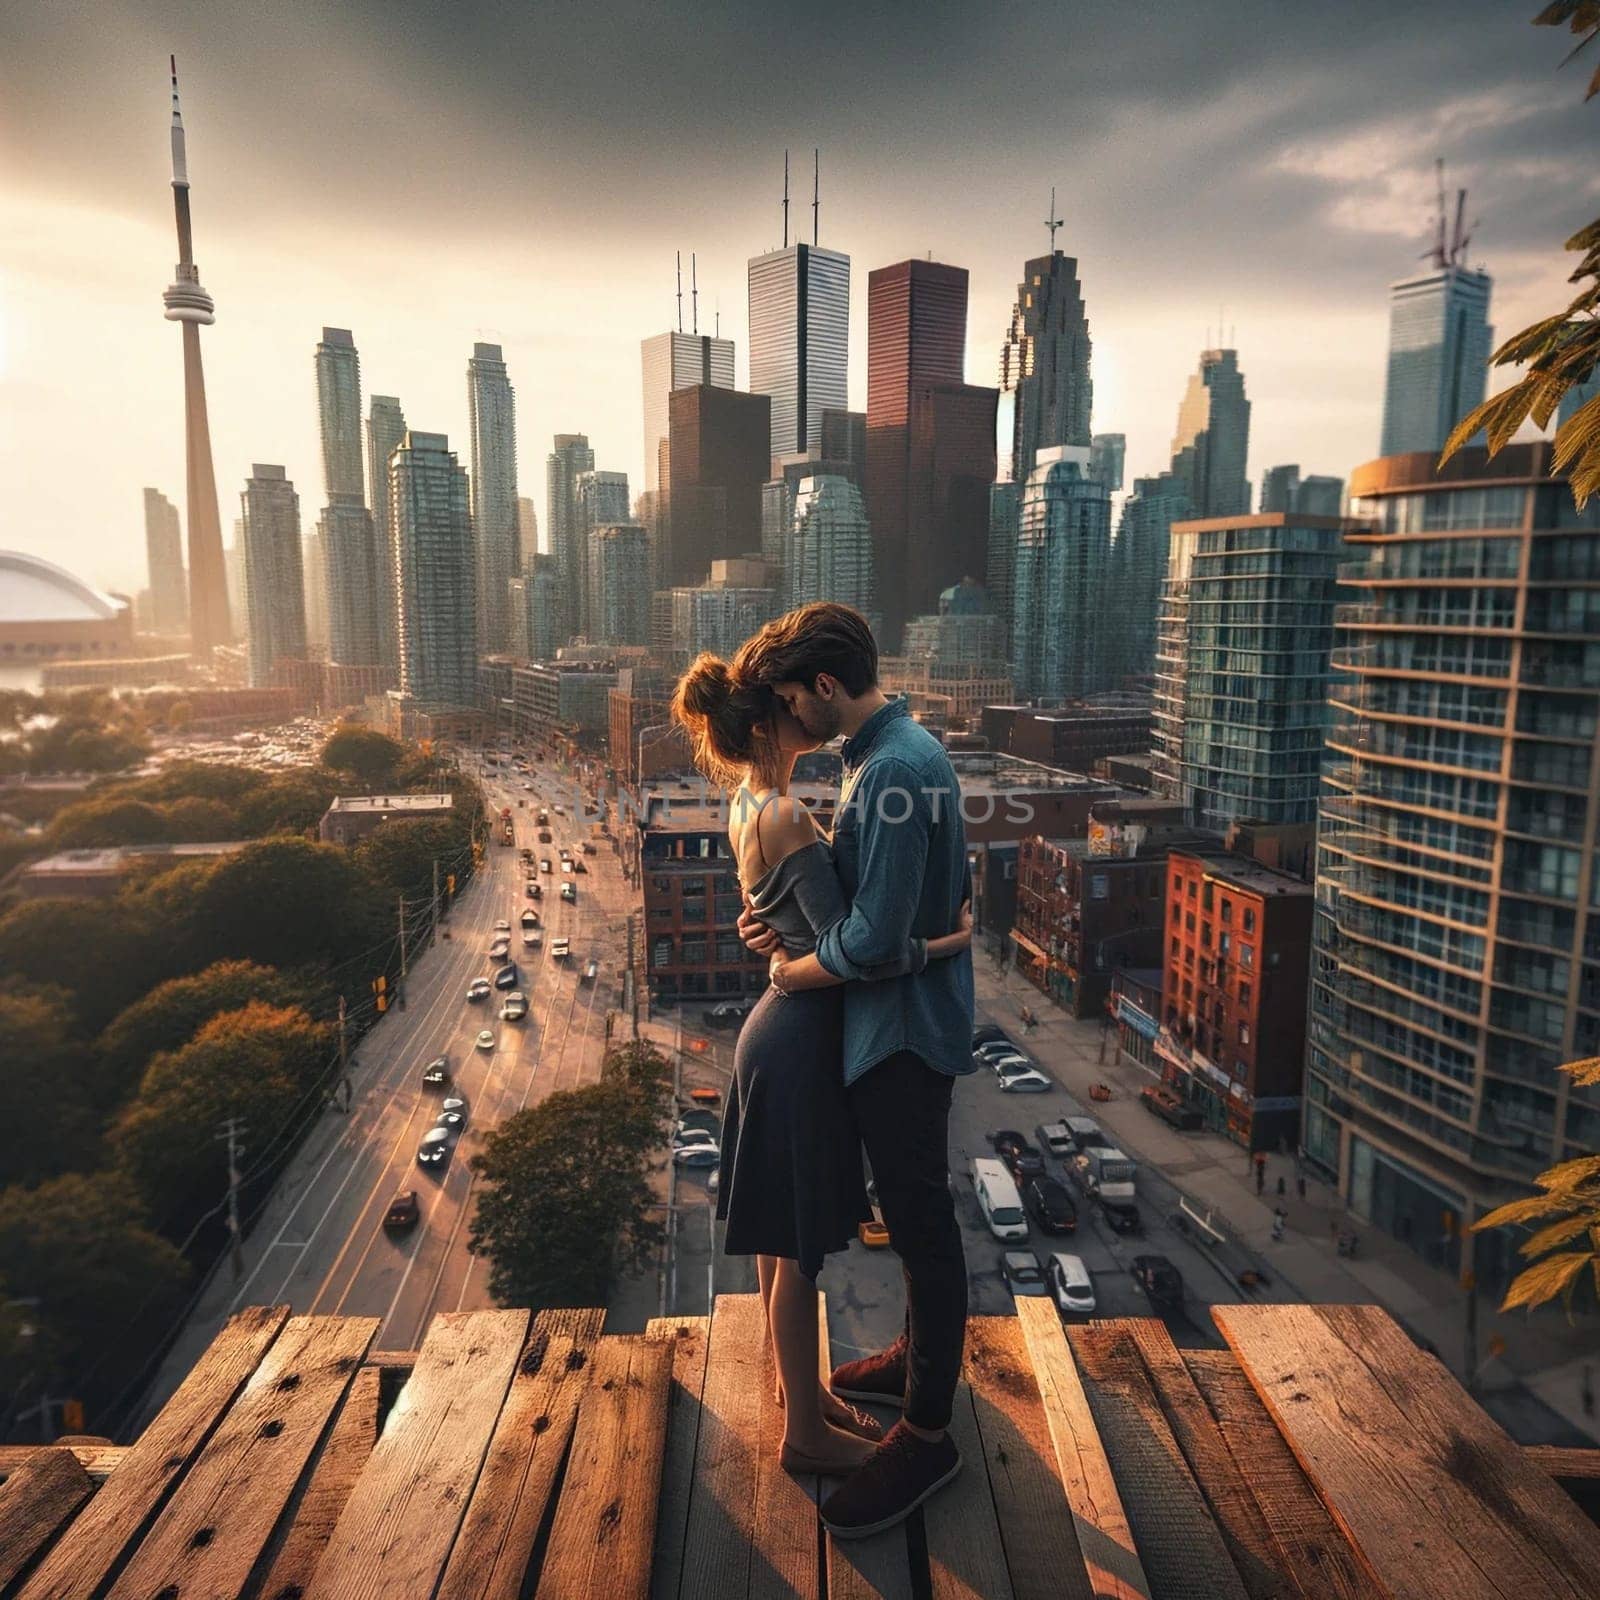 Couple on Wooden Platform in Toronto by Nadtochiy